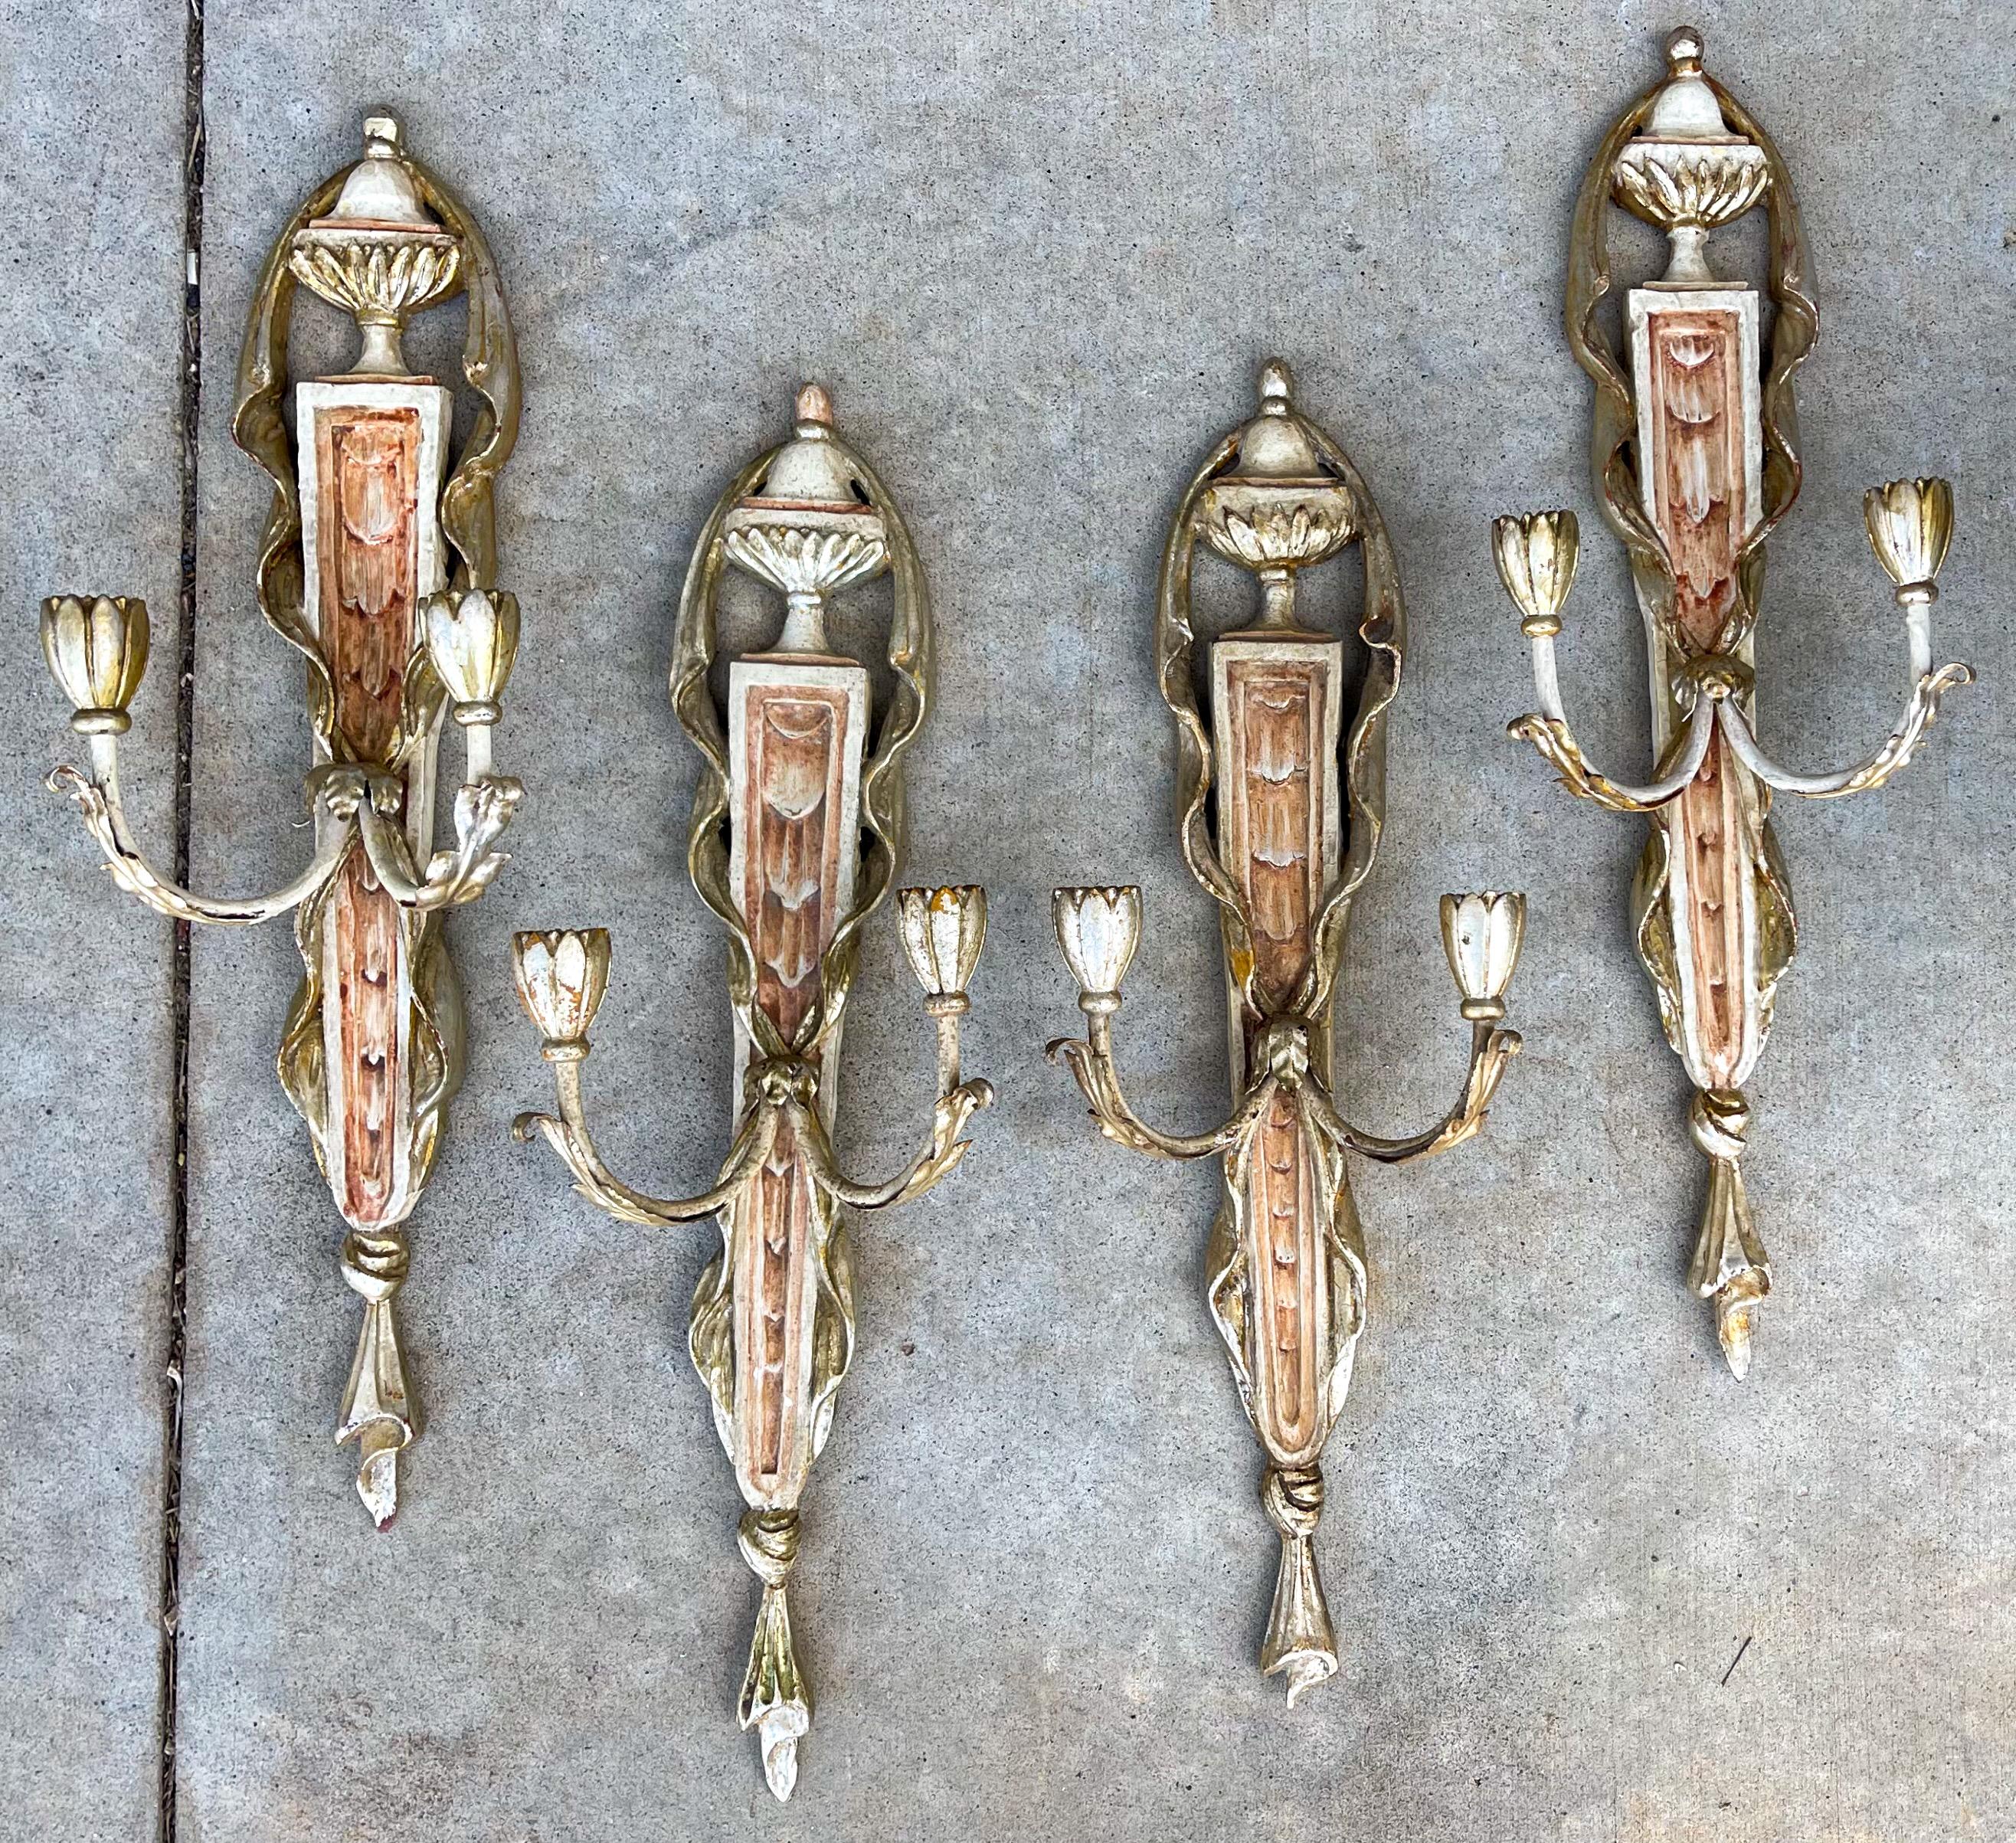 These are wonderful! This is a set of four neo-classical style silver giltwood and painted sconces. Note the urn form with faux drapes cascading down each side. The cream and salmon tones give a soothing elegance to the set. They are not electrified